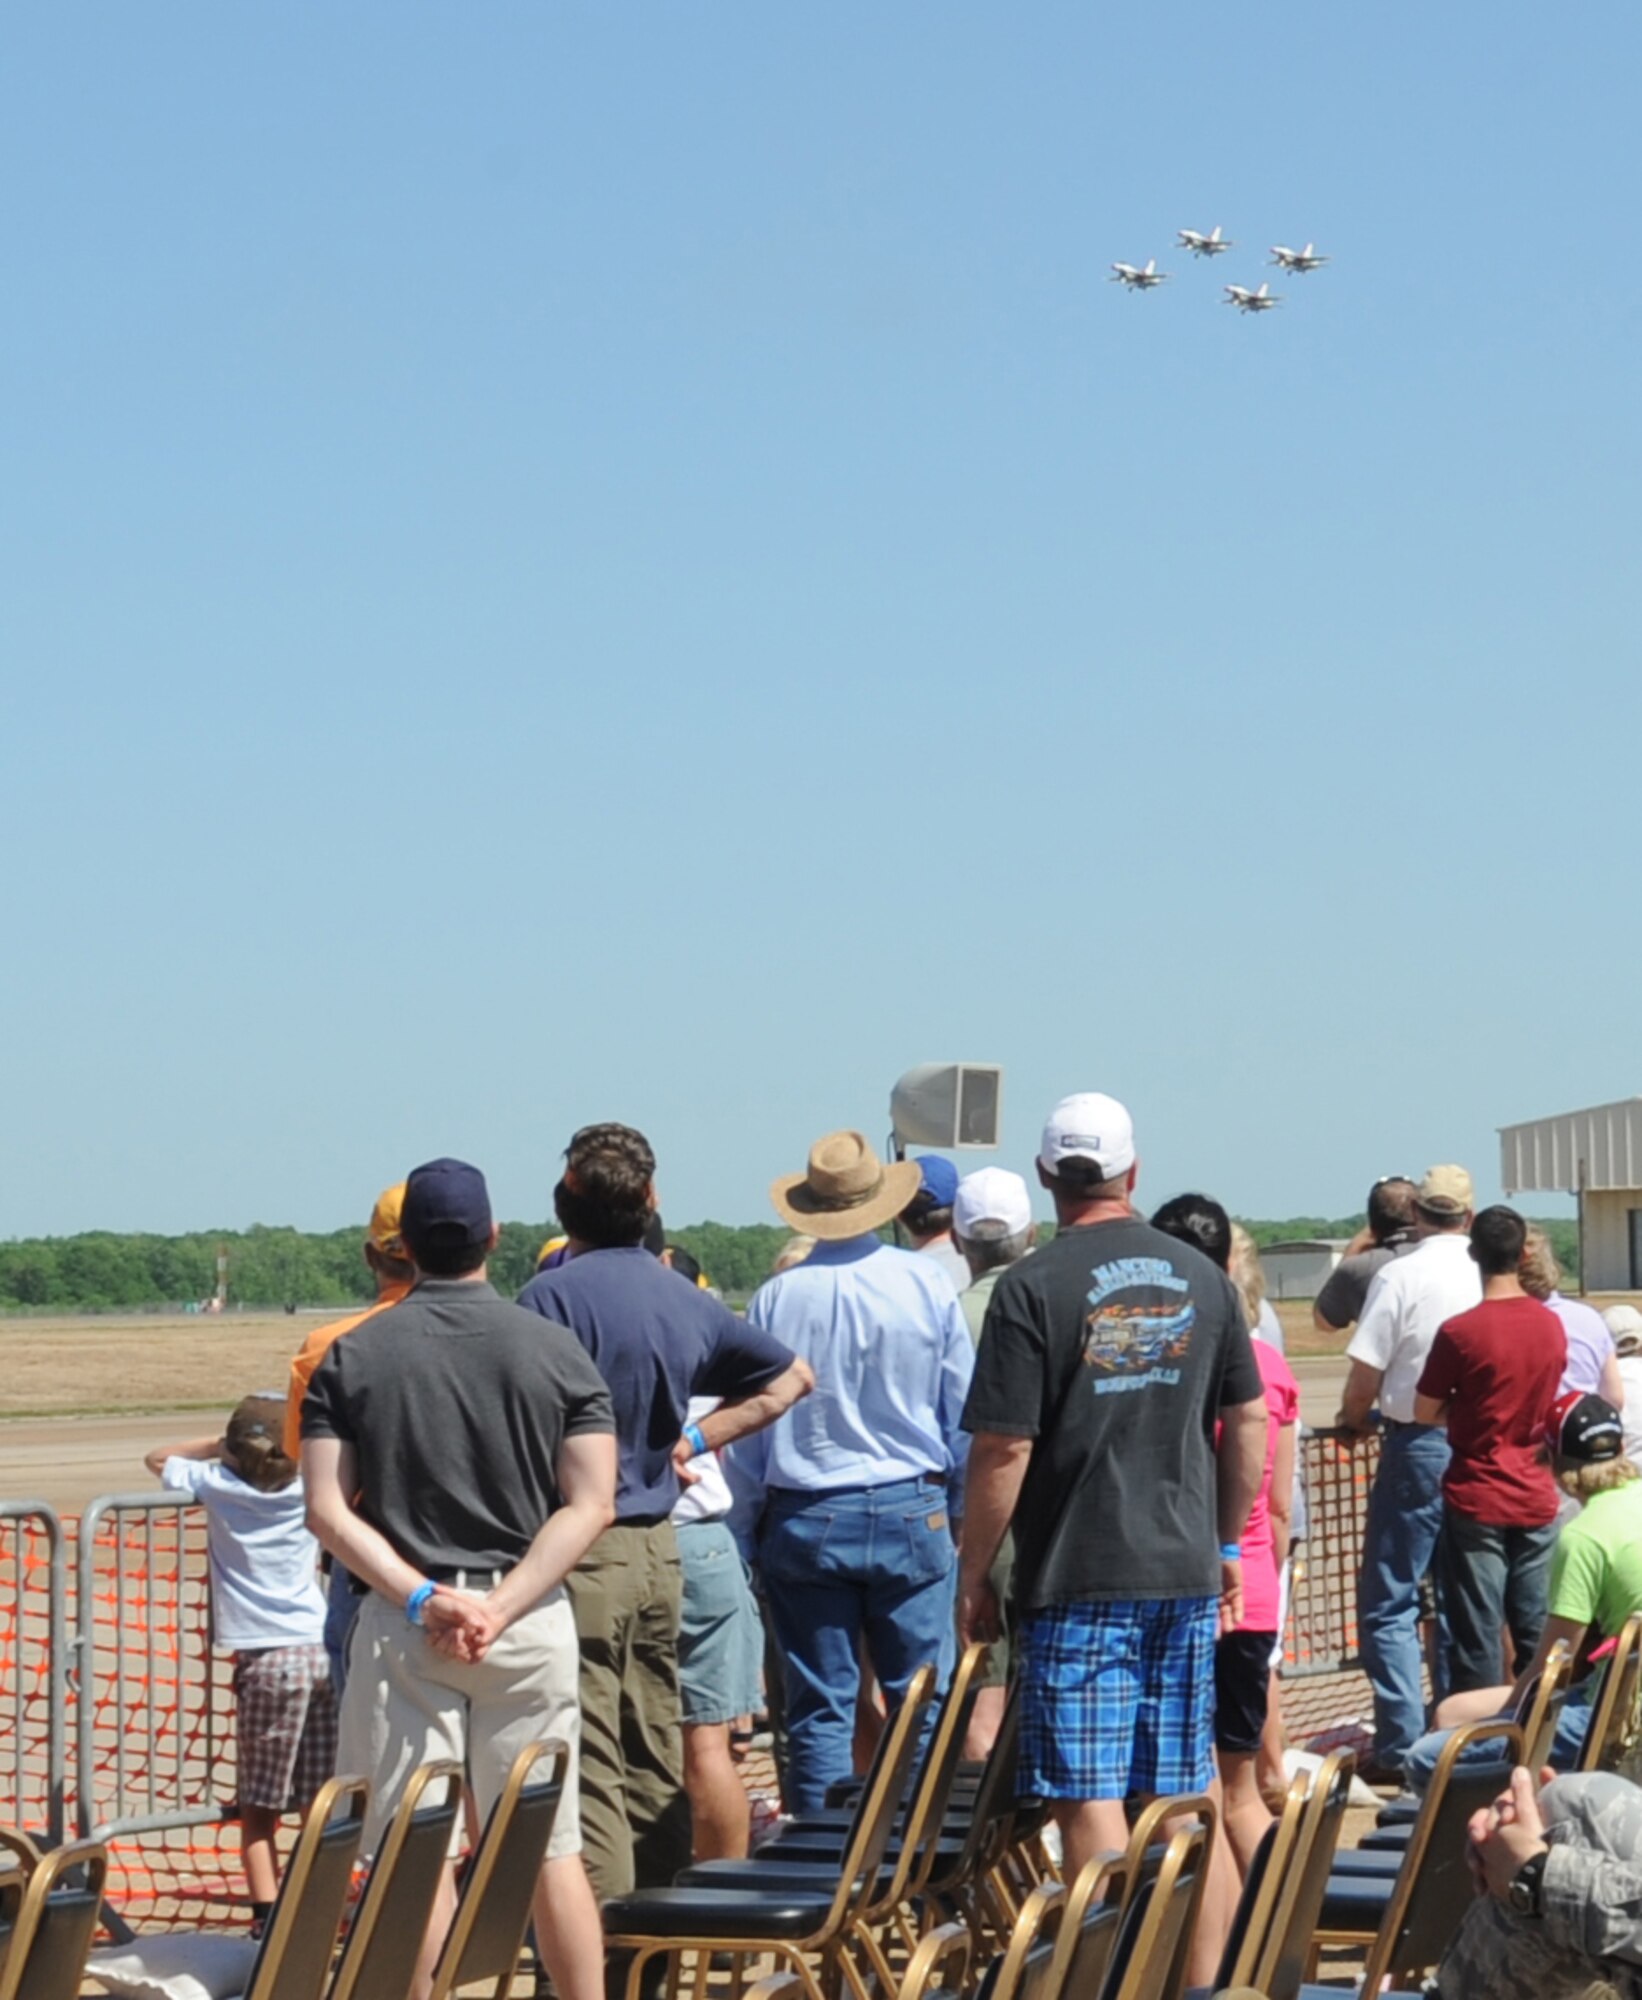 BARKSDALE AIR FORCE BASE, La. – Spectators gaze at the sky as the USAF Aerial Demonstration Team, the Thunderbirds, perform the diamond formation at the Barksdale 2010 Defenders of Liberty Air Show April 24. The Thunderbirds performed April 24 and 25. (U.S. Air Force photo by Senior Airman Alexandra M. Longfellow) (RELEASED)